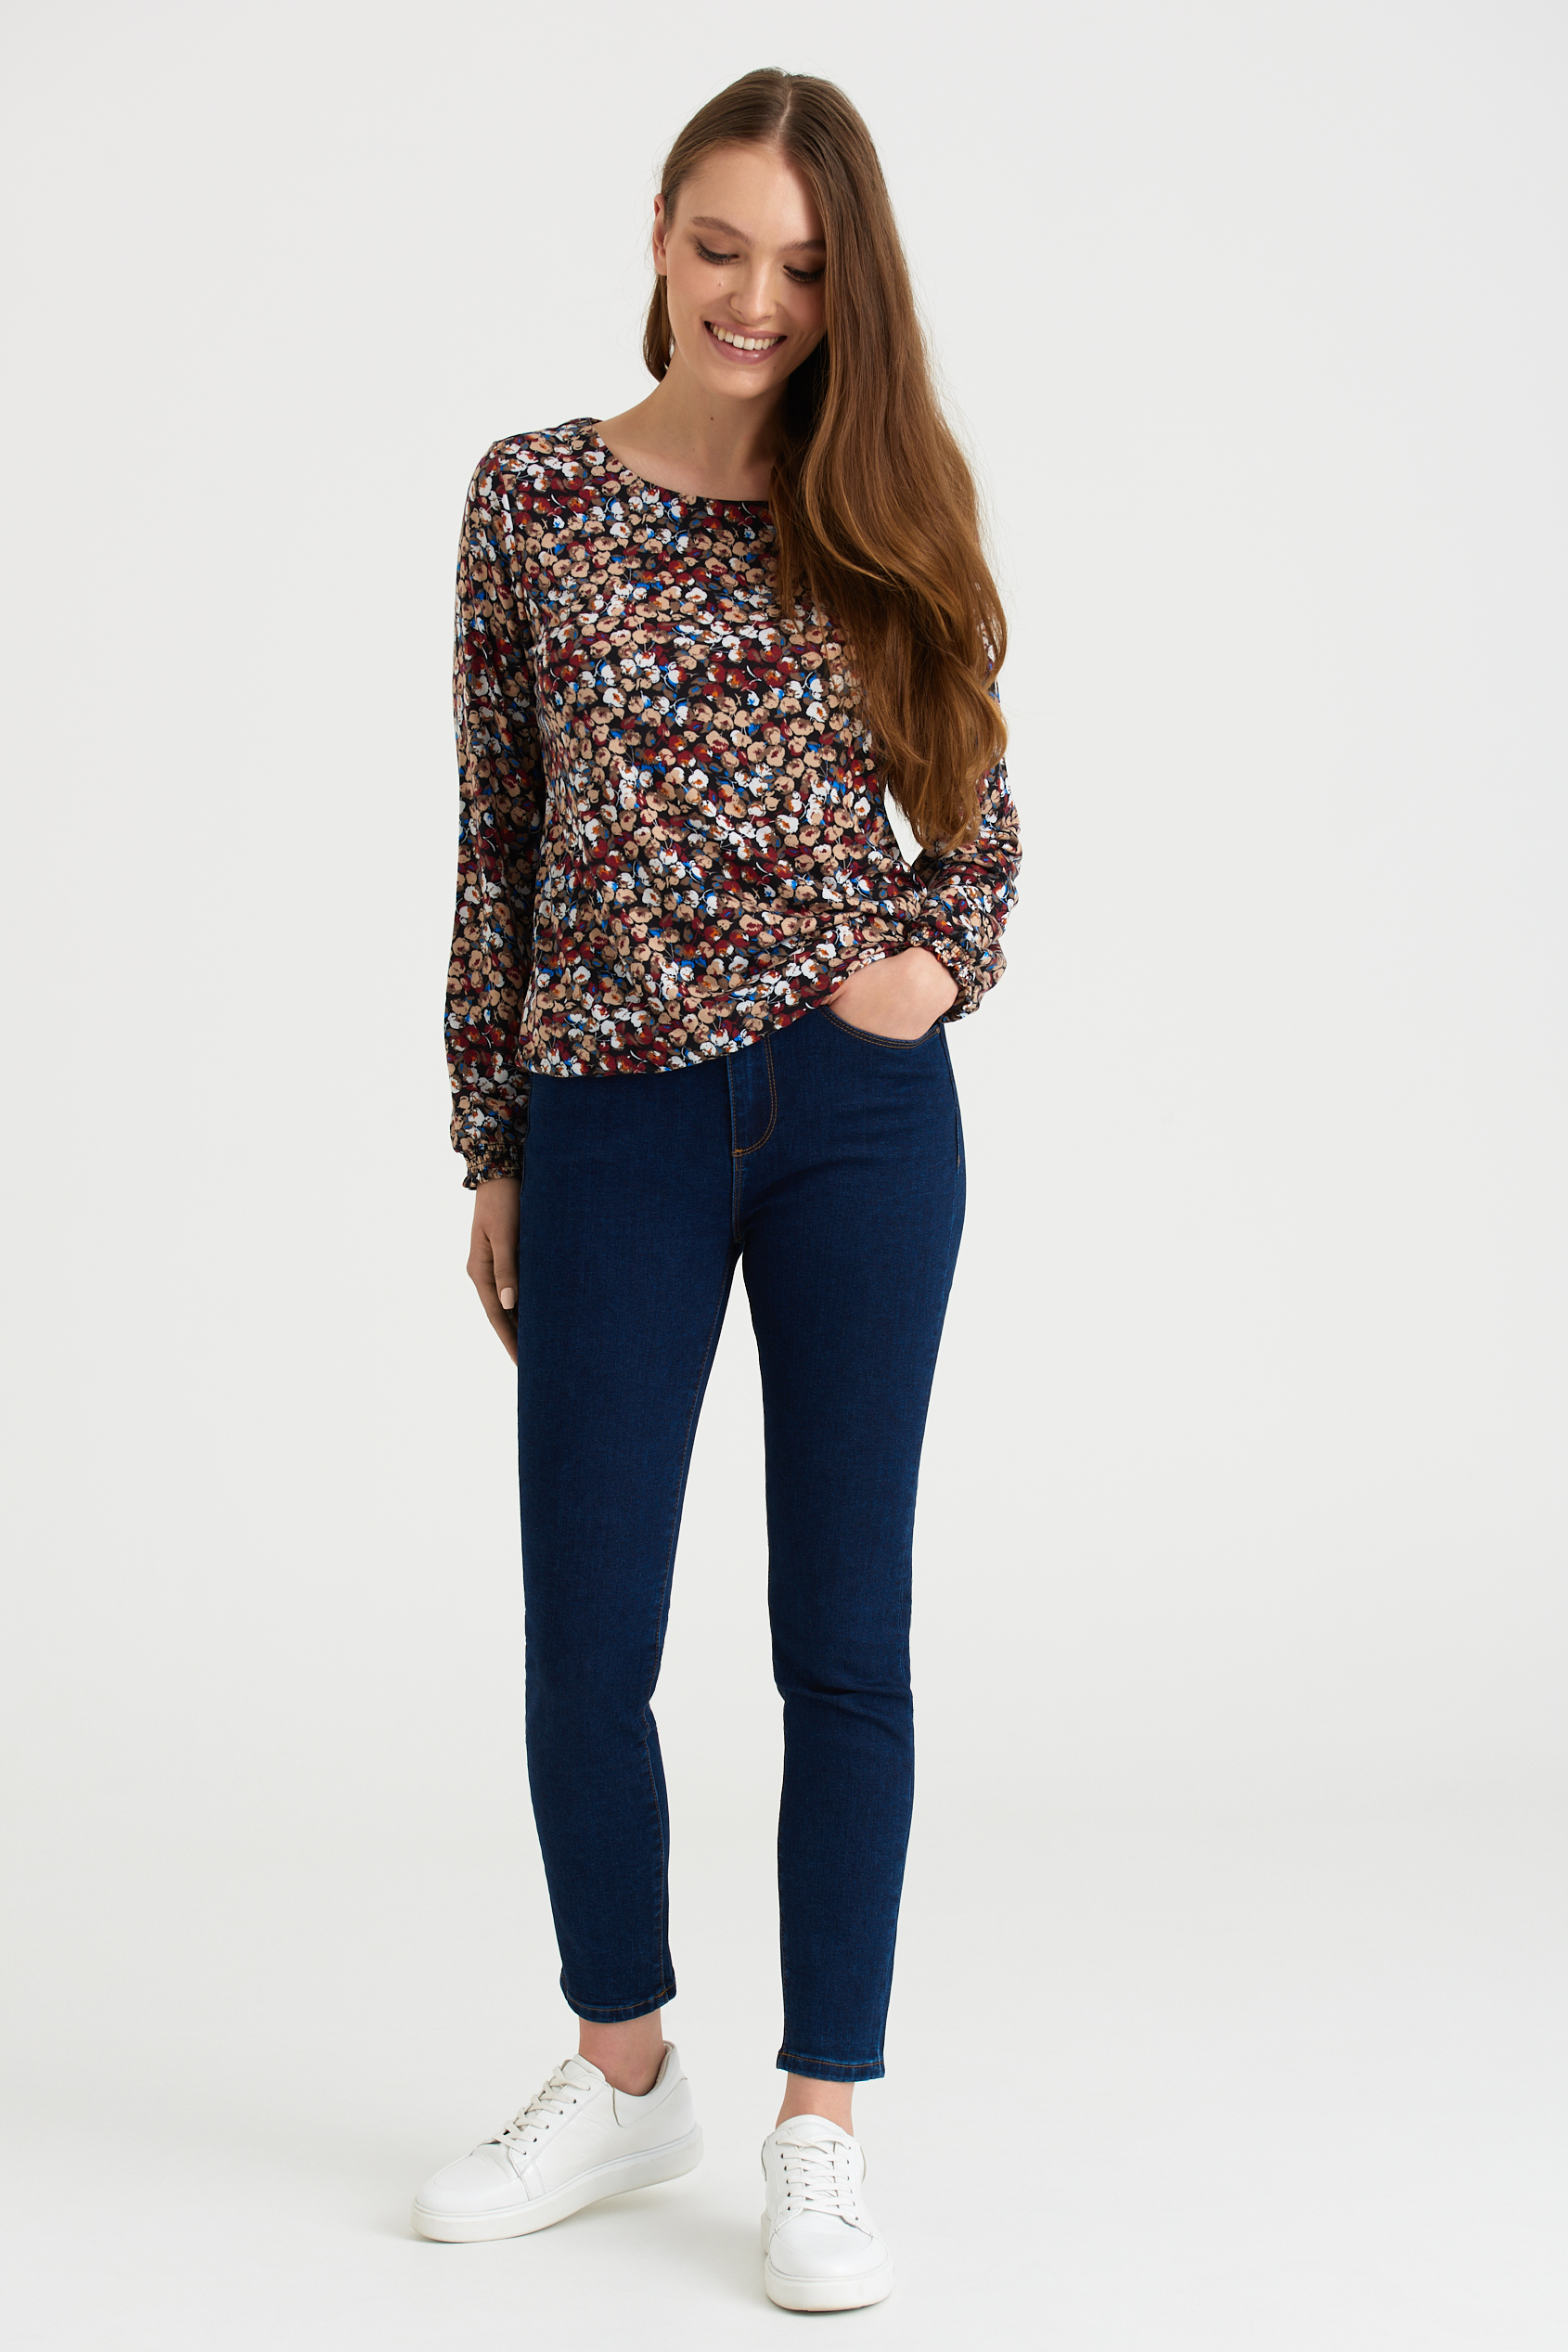 Greenpoint Woman's Blouse TOP719W22MDW05